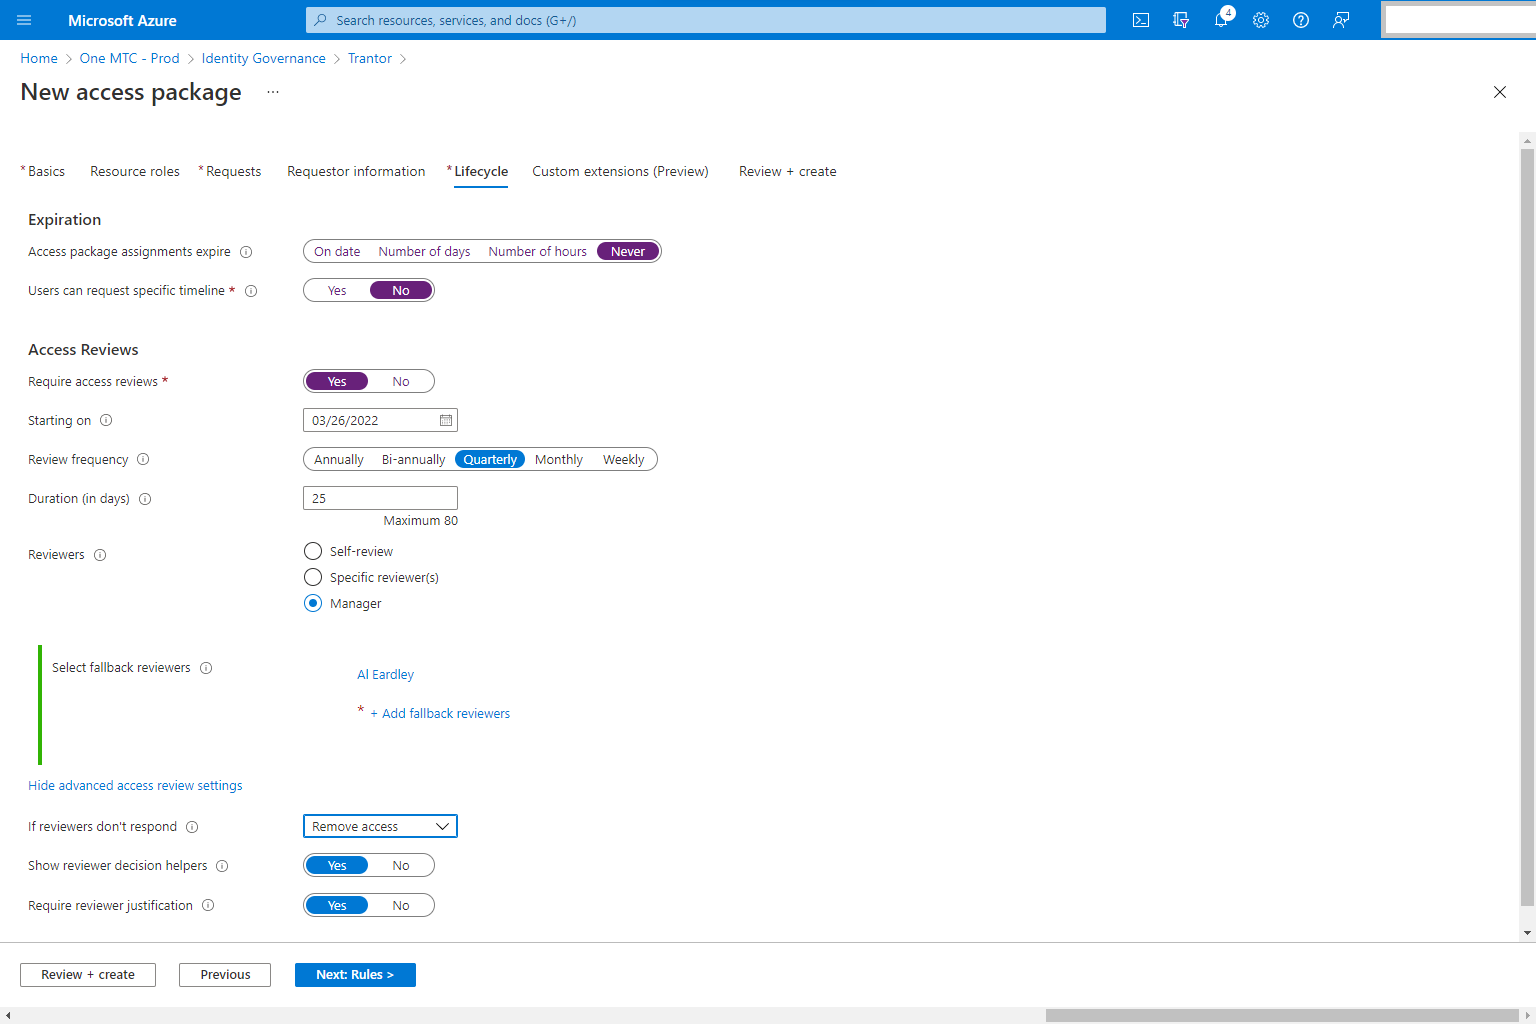 Screen shot of new Access Packages - Lifecycle